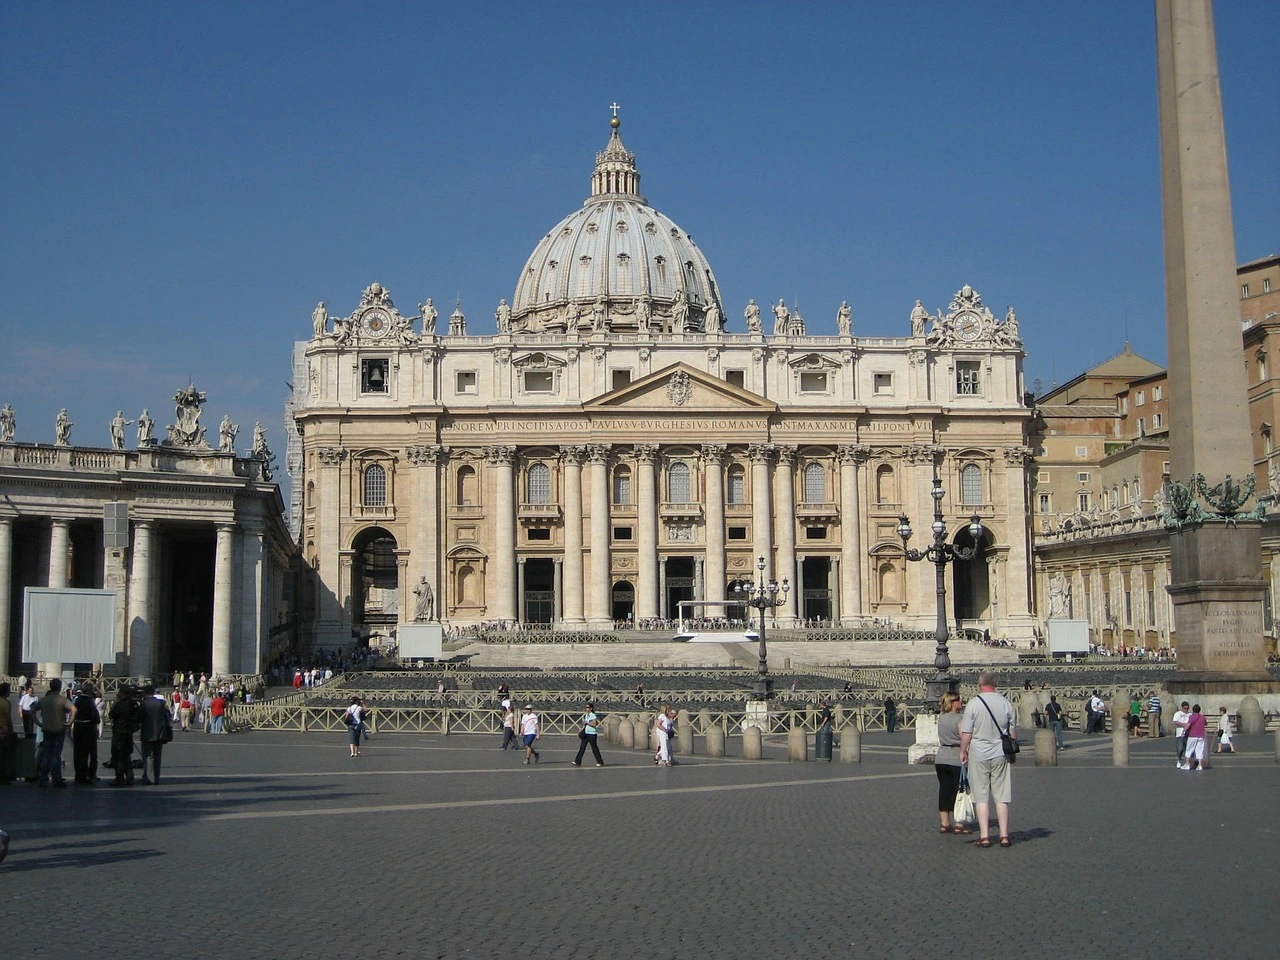 Where can I book skip-the-line Vatican tickets online?